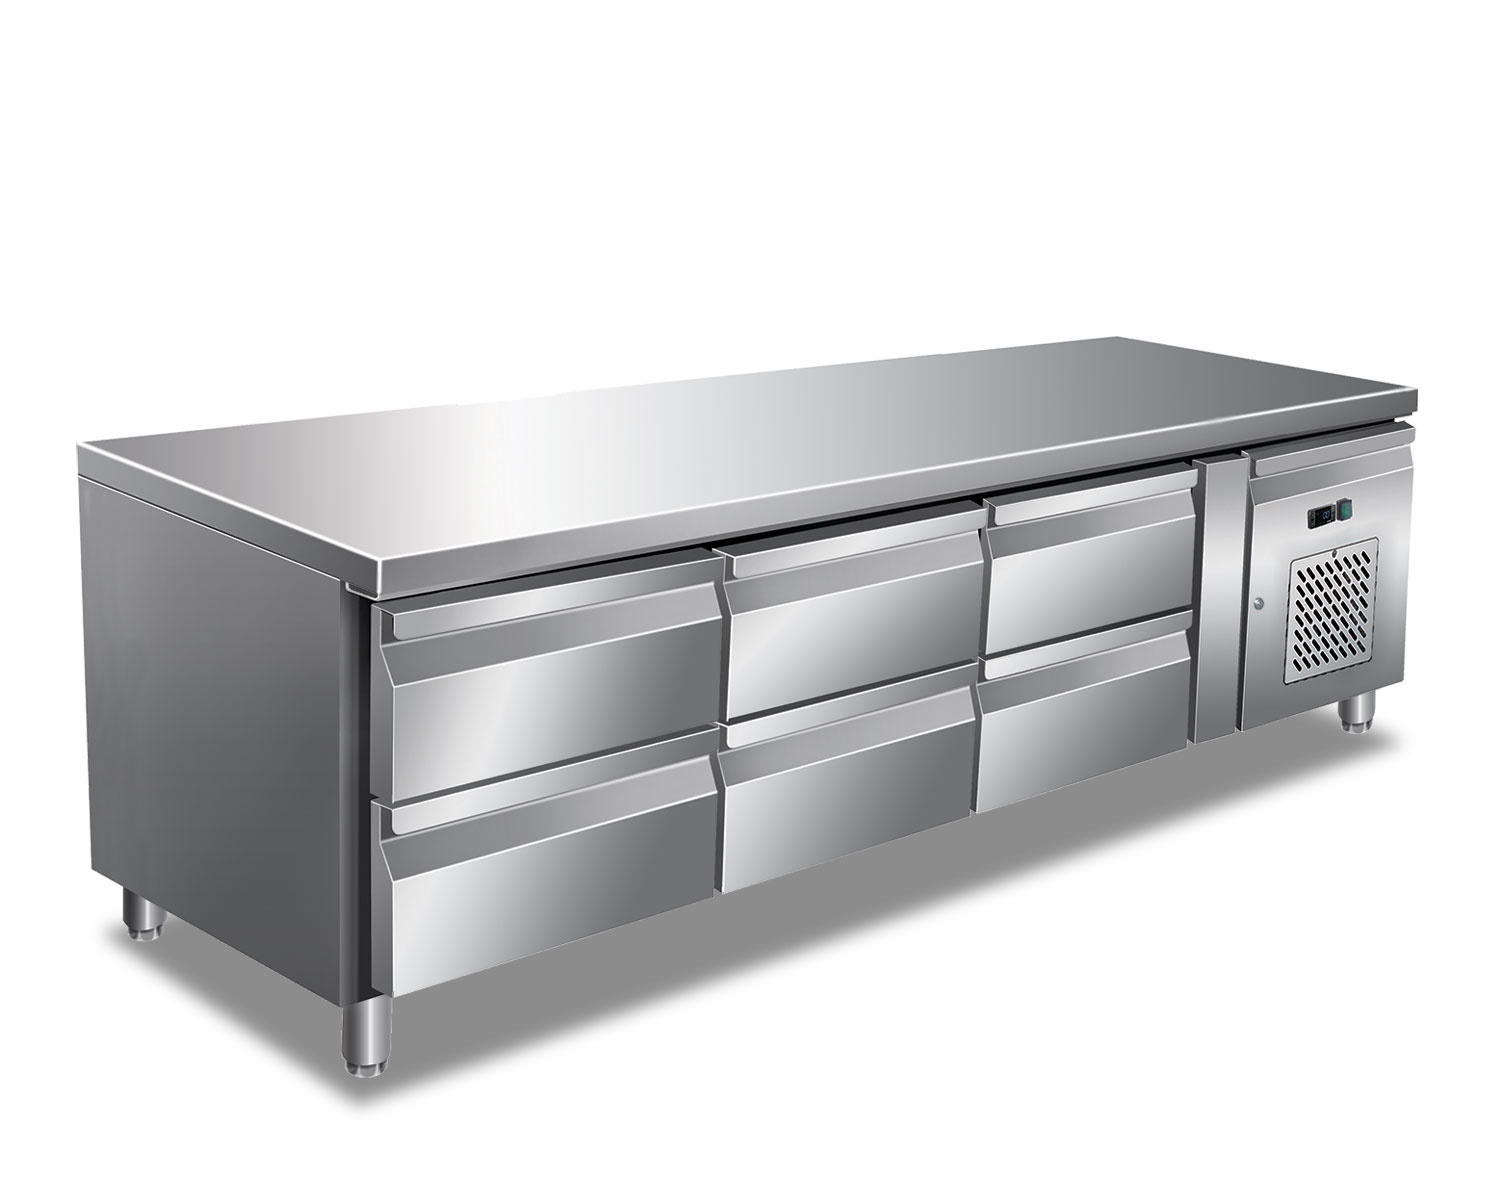 SYSTEMGRILL 6P INOX AISI 304